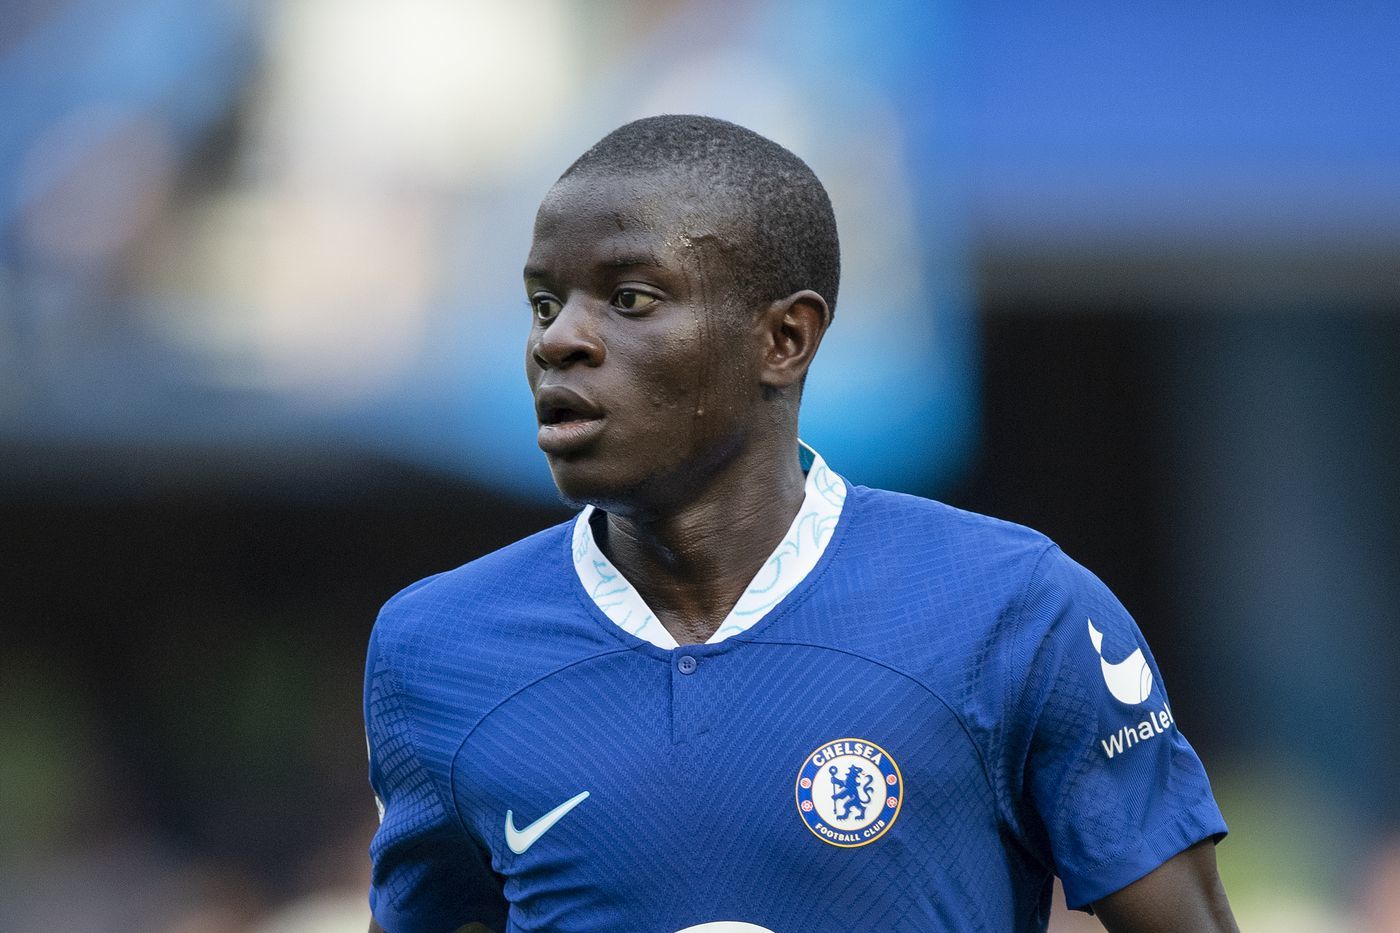 World Champion 2018 Kante may leave Chelsea for Real Madrid in summer